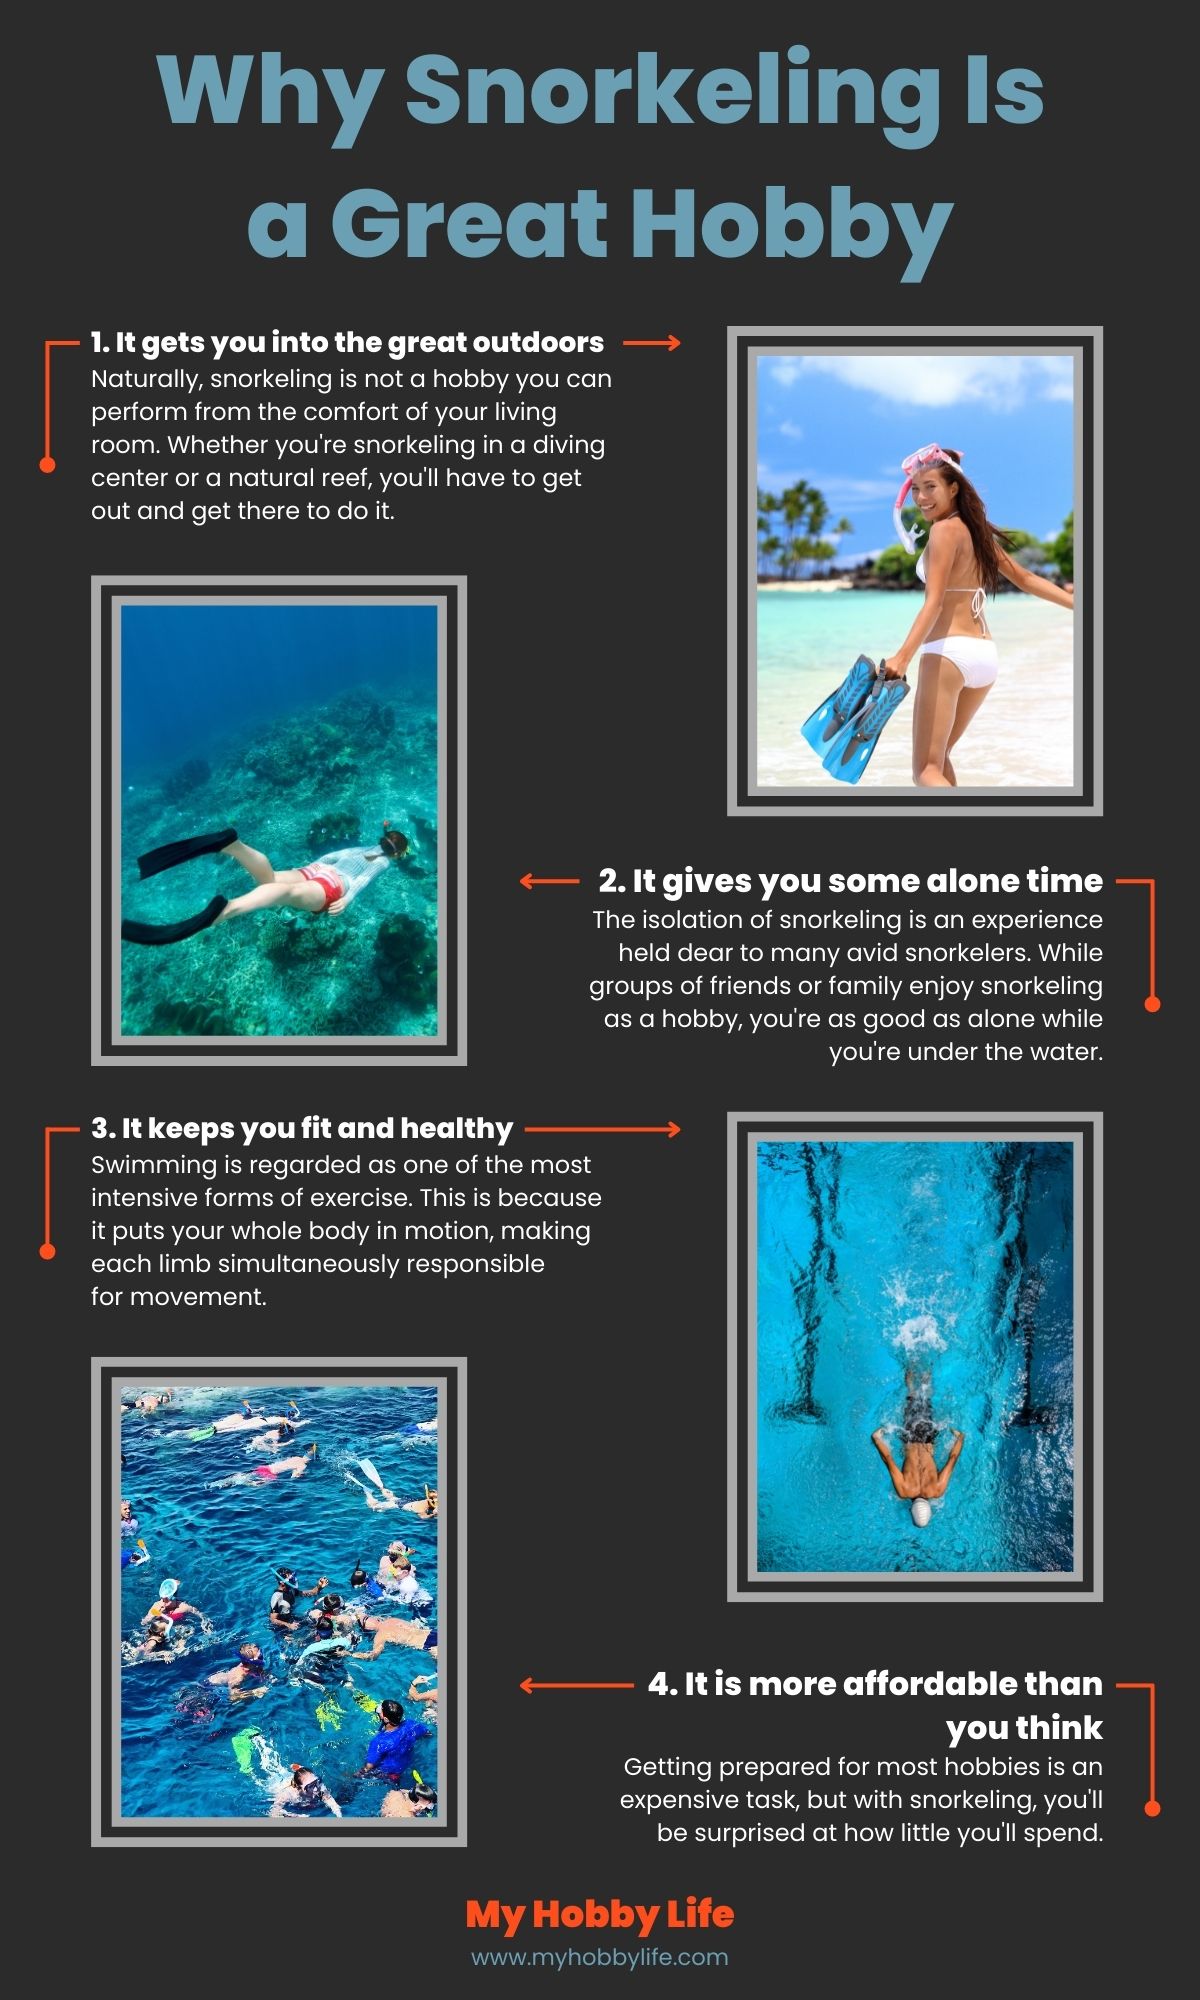 Why Snorkeling Is a Great Hobby